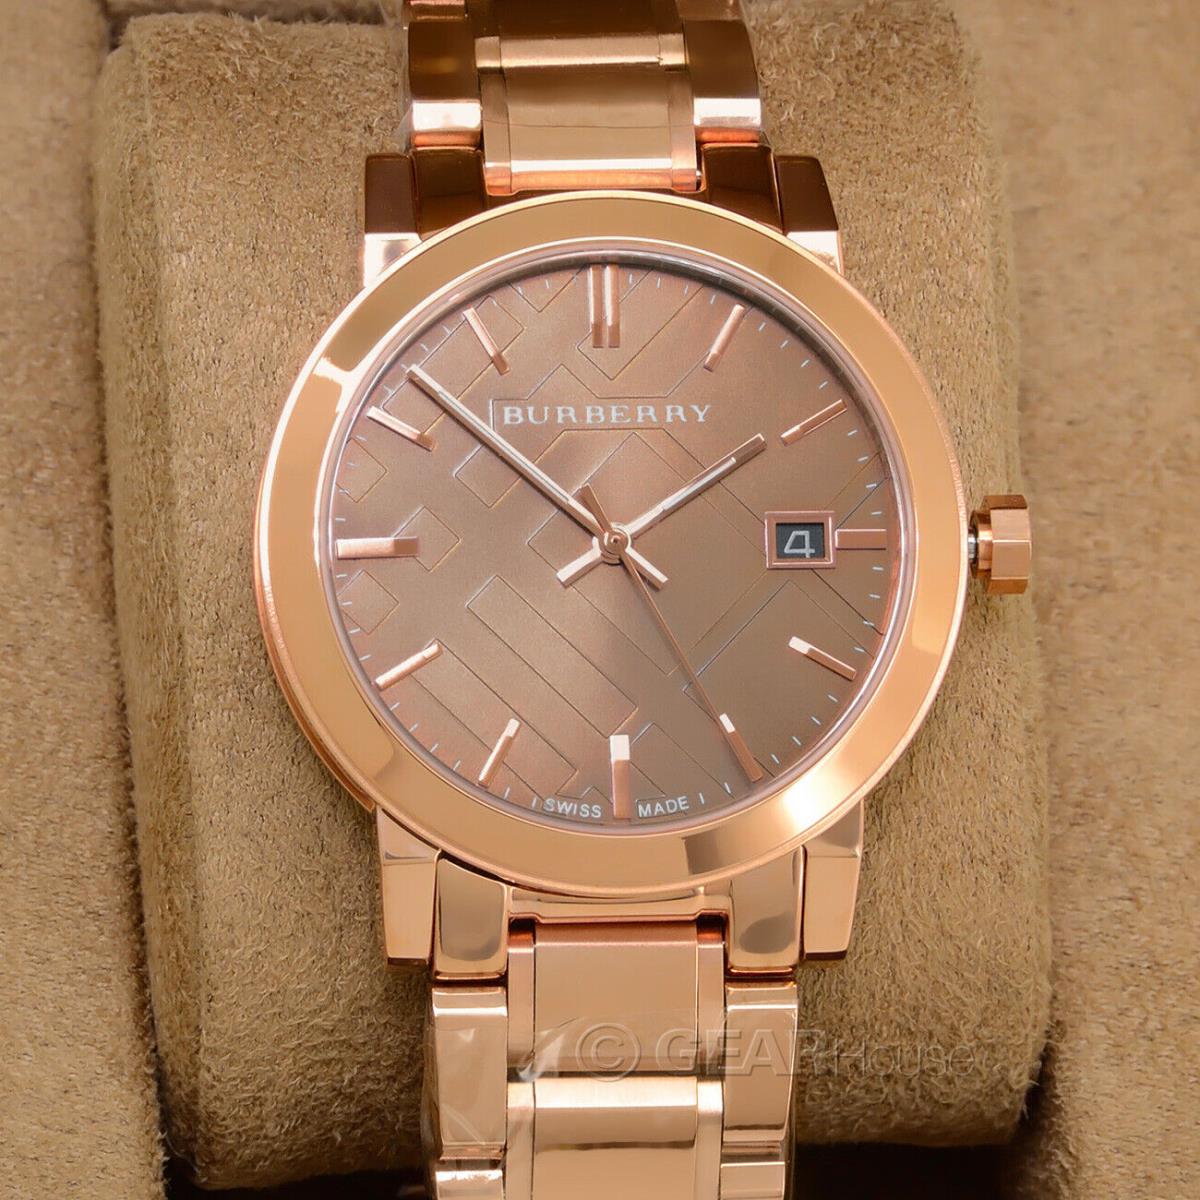 Burberry watch City - Brown Dial, Rose Gold Band, Rose Gold Bezel 7